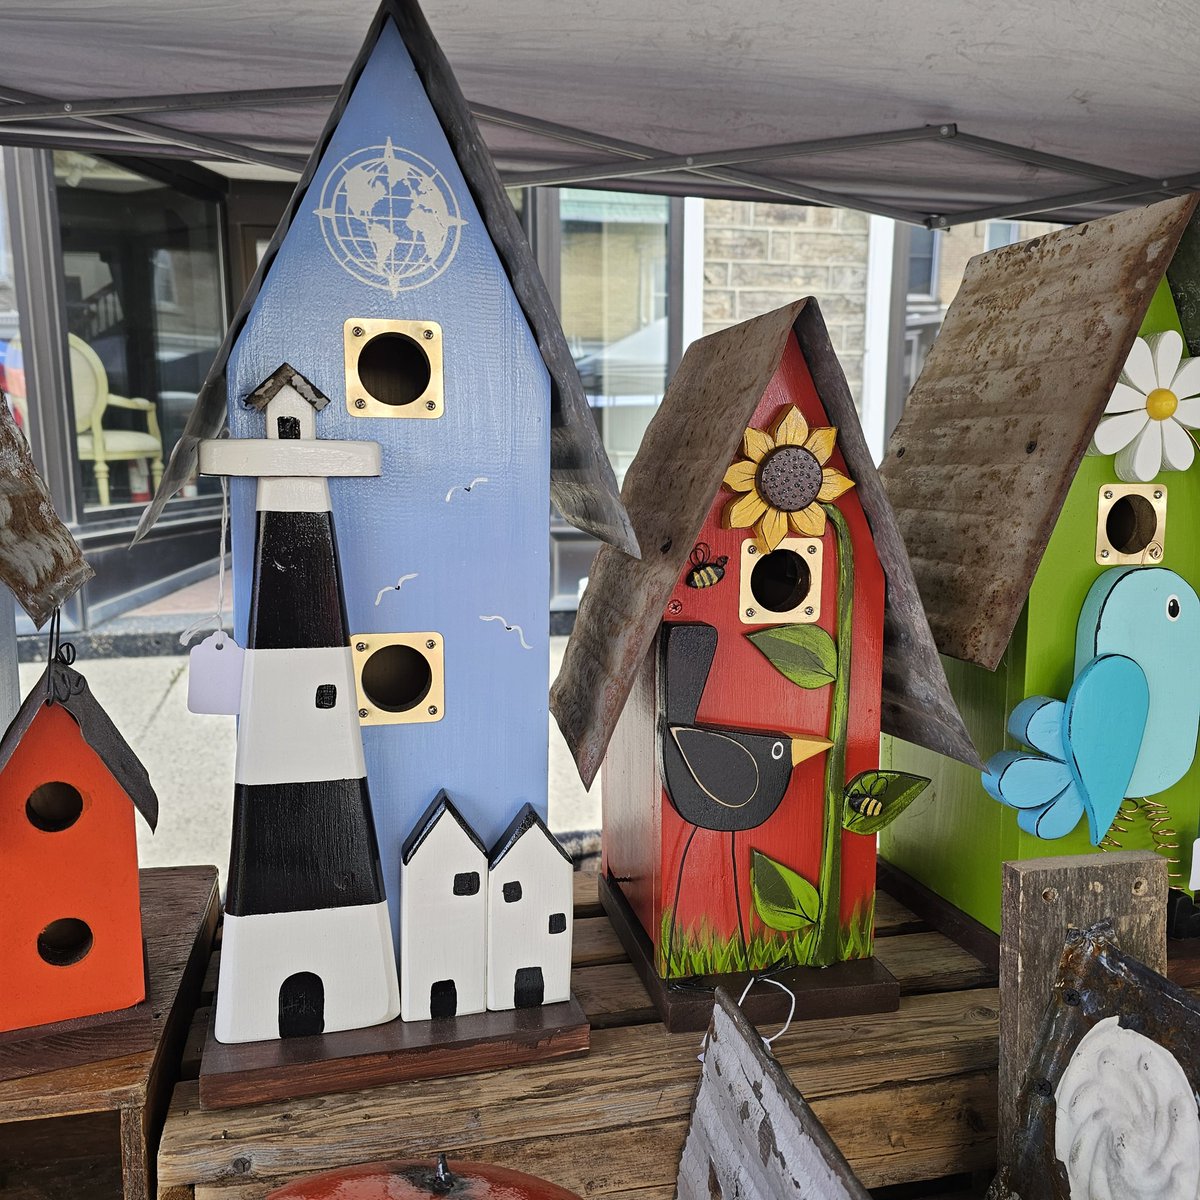 Good morning, X-ers!  Looking for a cozy, quirky abode for your feathered friends? Look no further! We've got a delightful collection of whimsical birdhouses that'll make your backyard the talk of the town!  #WhimsicalBirdhouses #BirdhouseLife #XSale